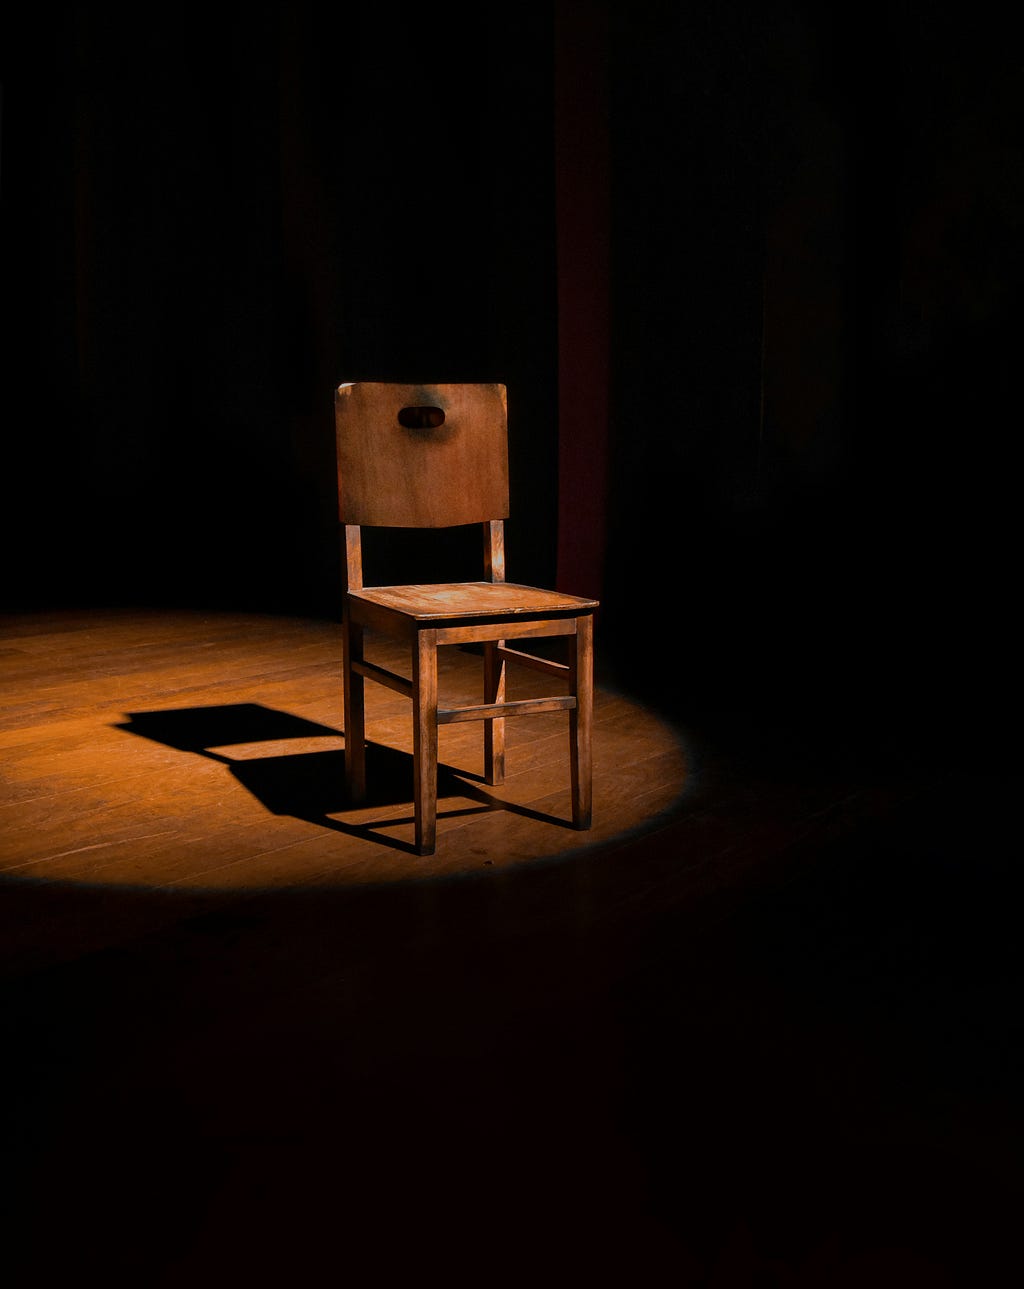 Bright light revealing a brown wooden ladderback chair while shadows lay in the surrounding space.